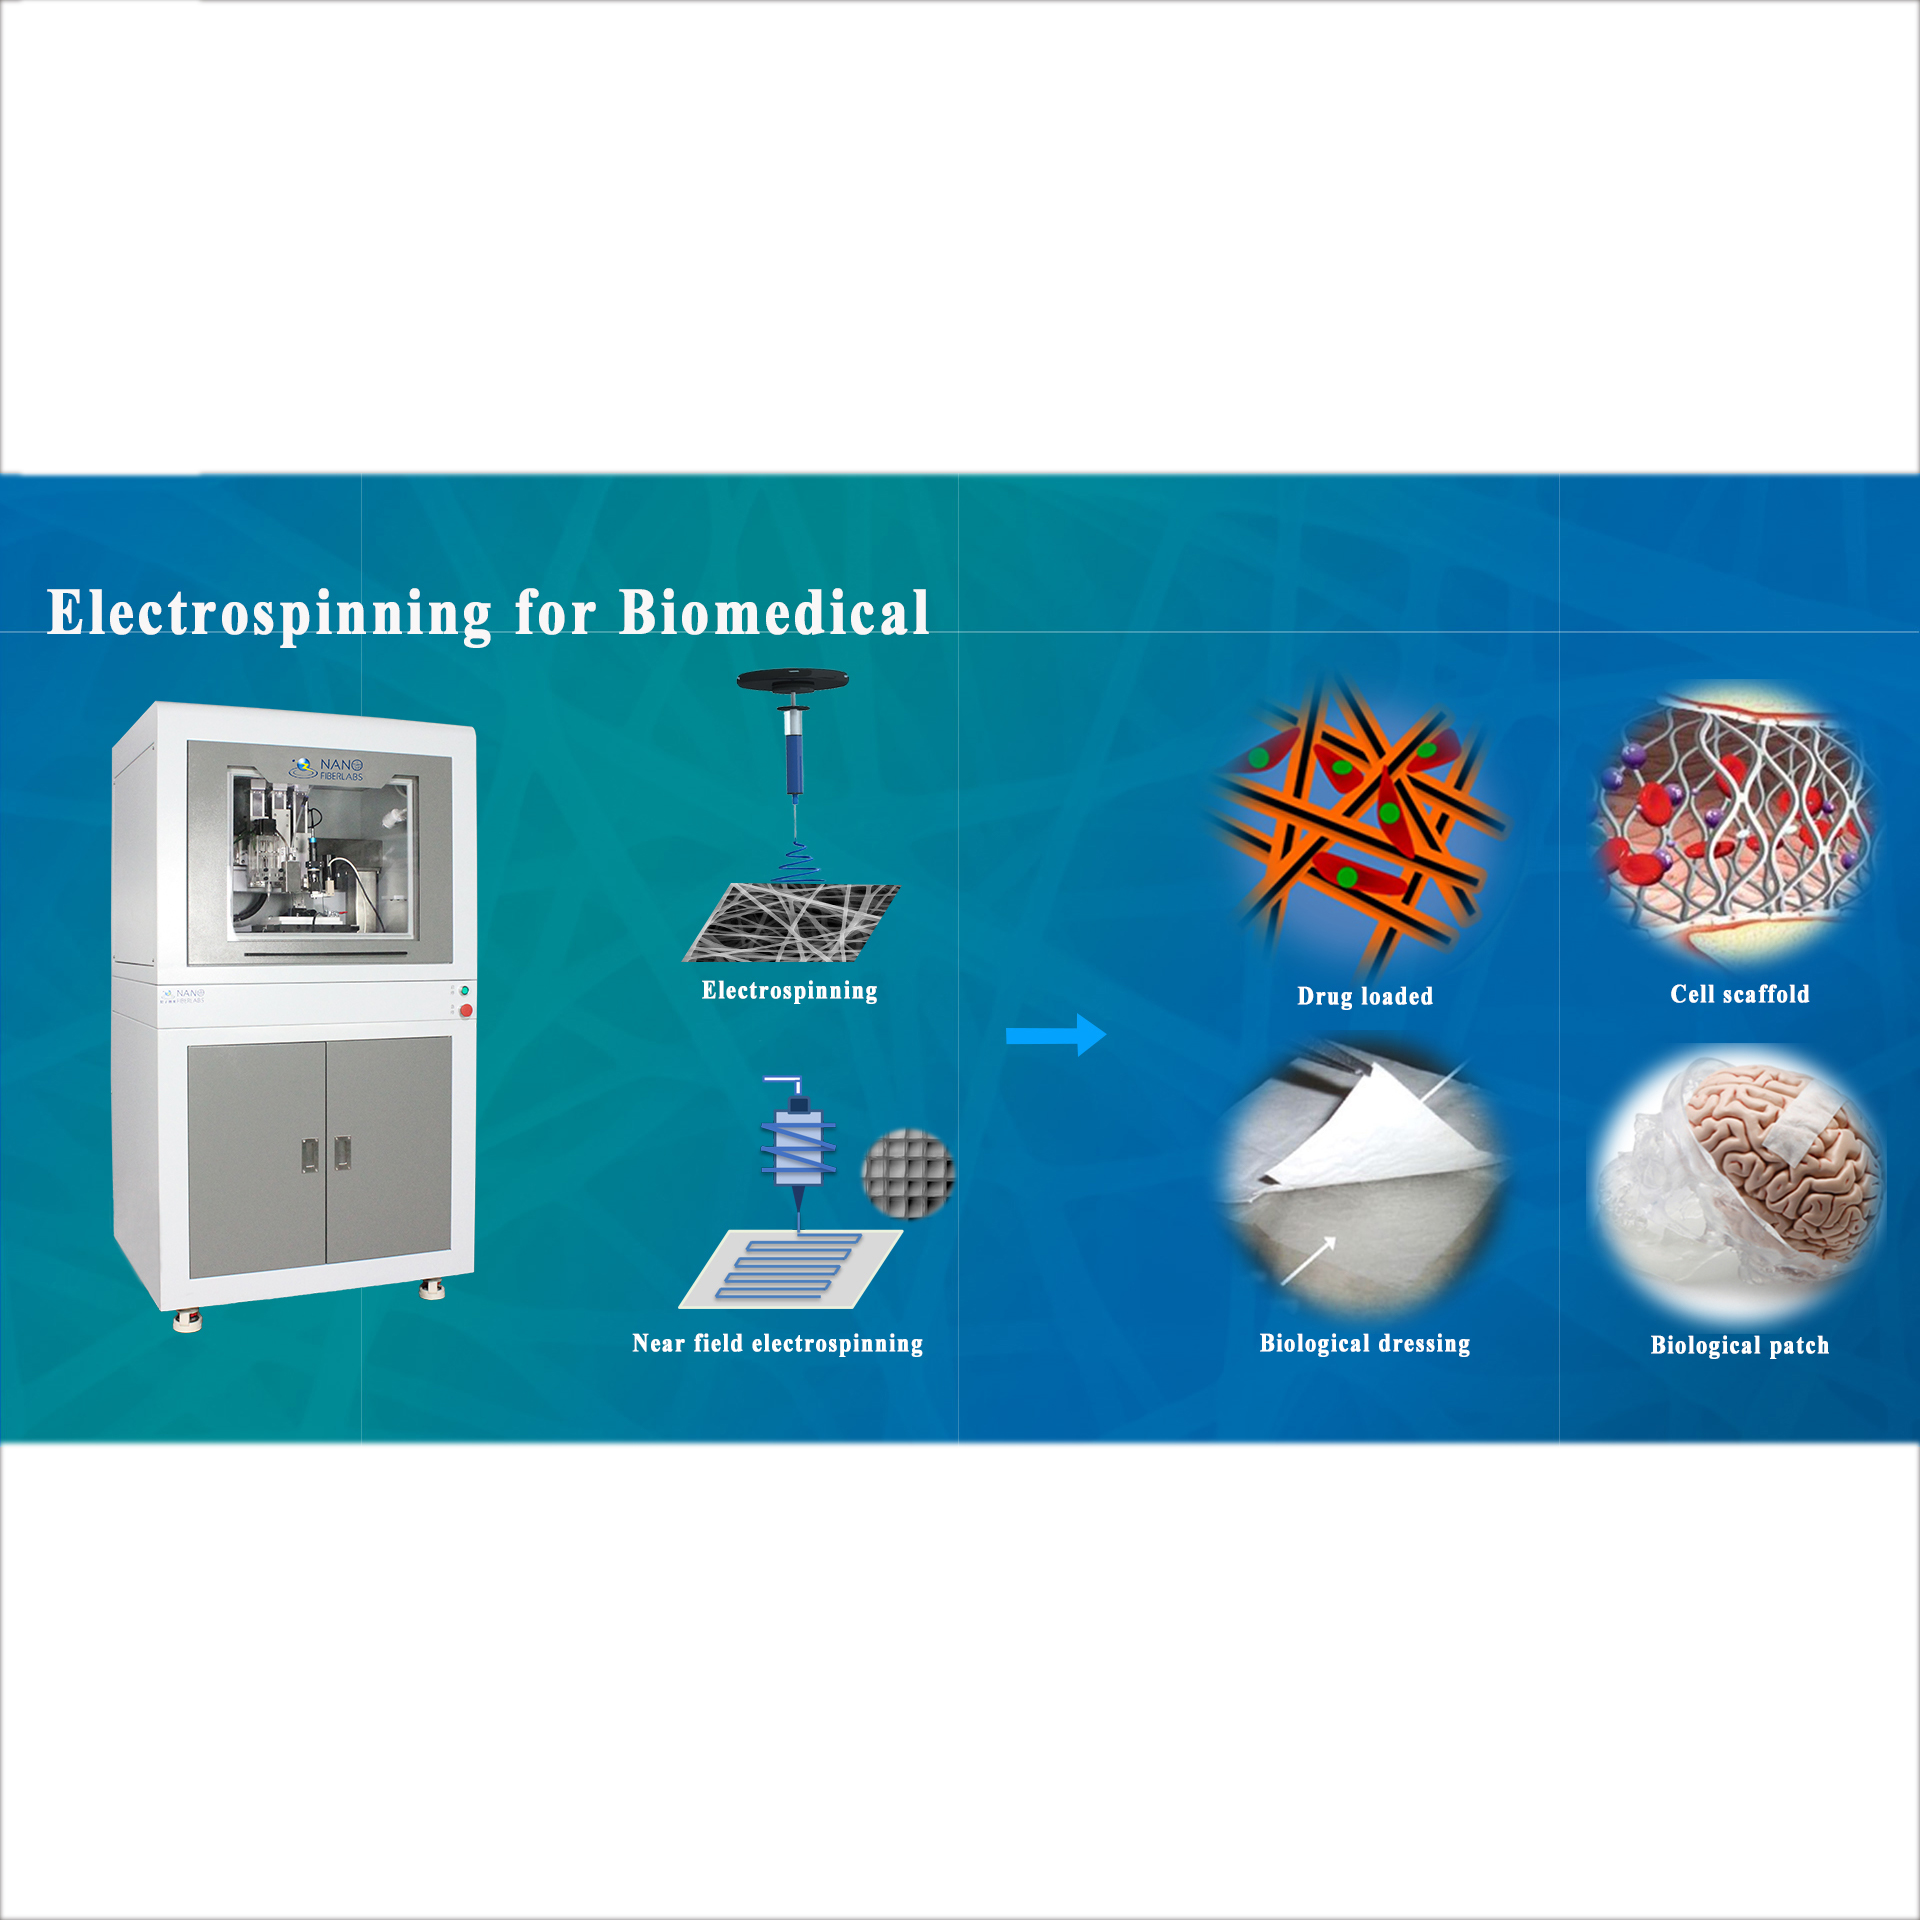 Electrospinning for Biomedical